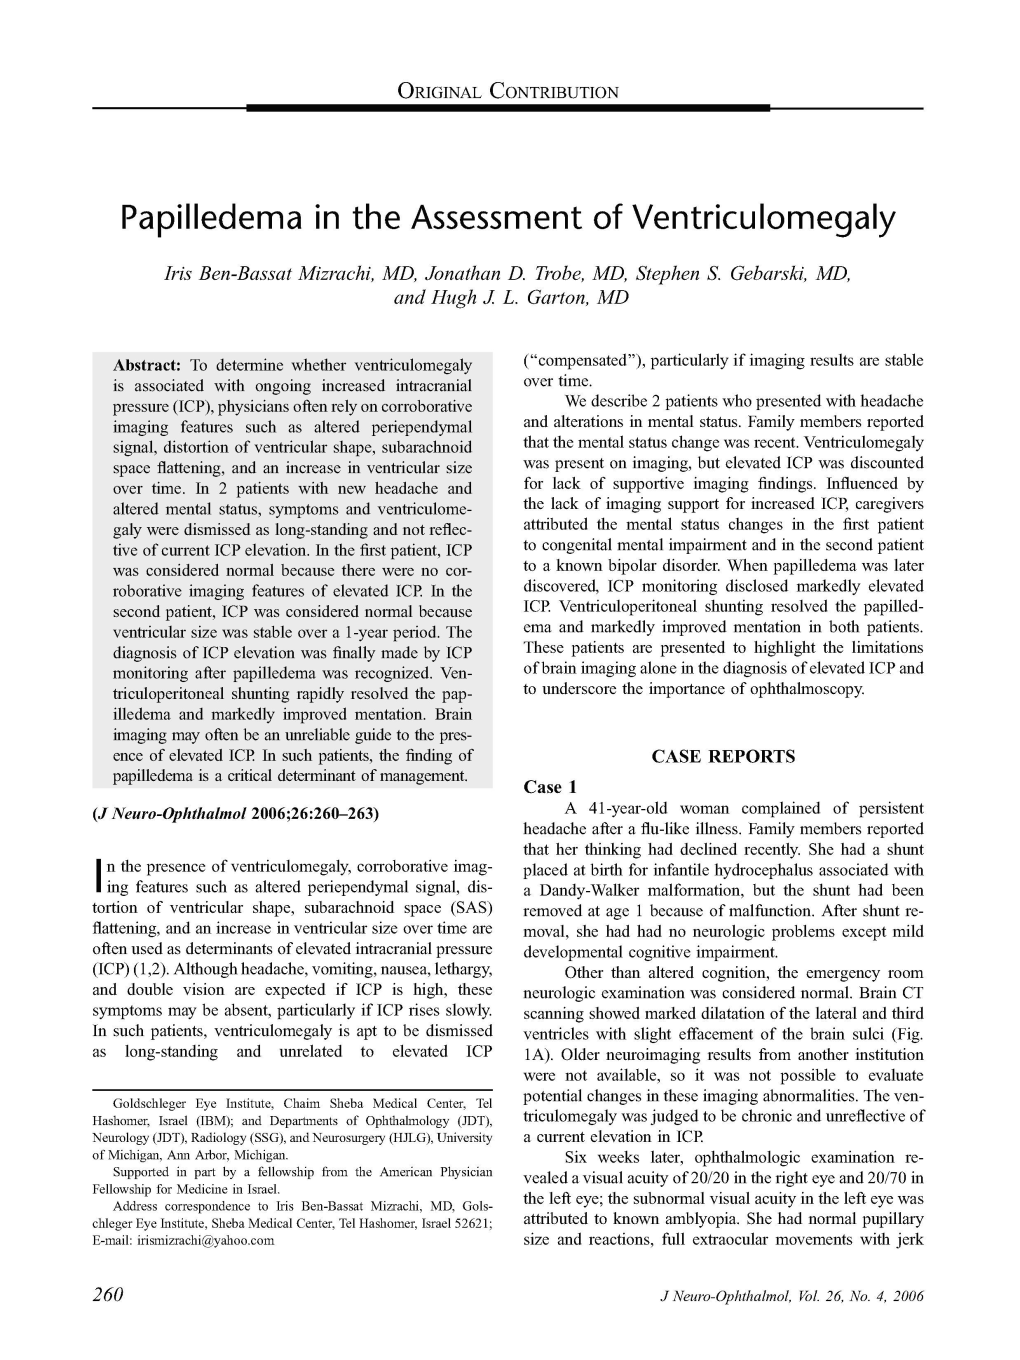 Papilledema in the Assessment of Ventriculomegaly